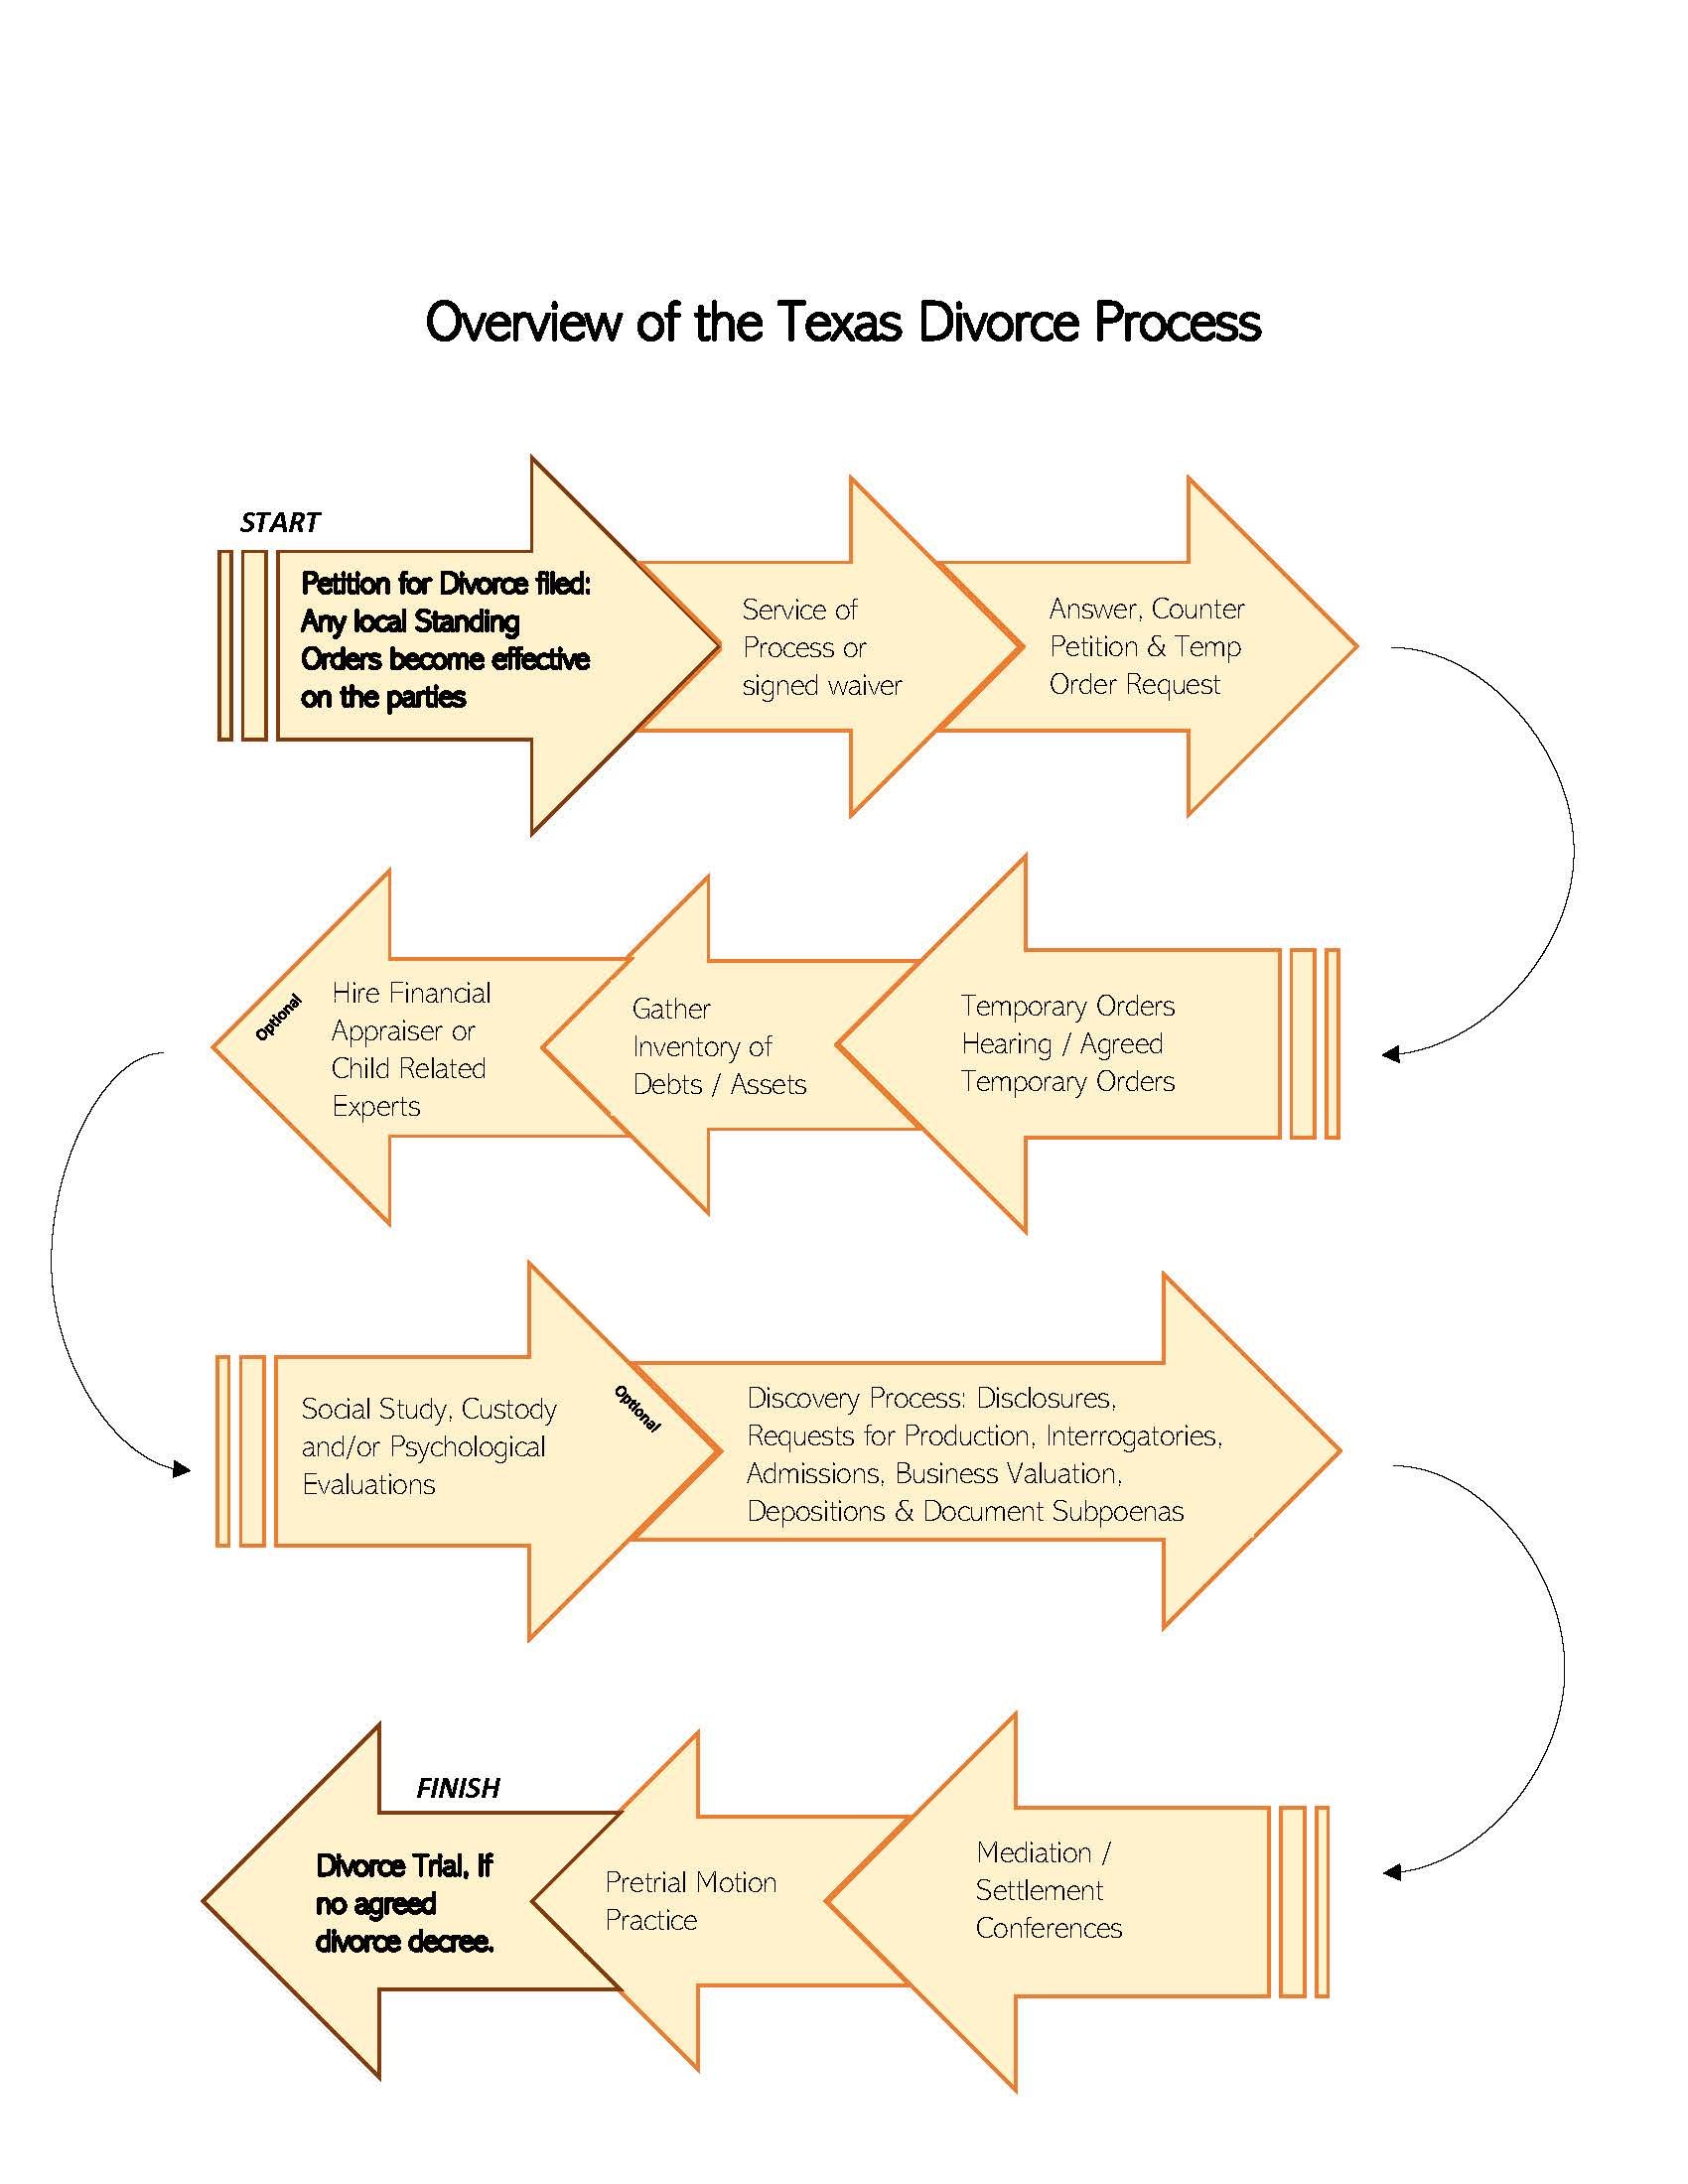 Overview of Texas Divorce Process